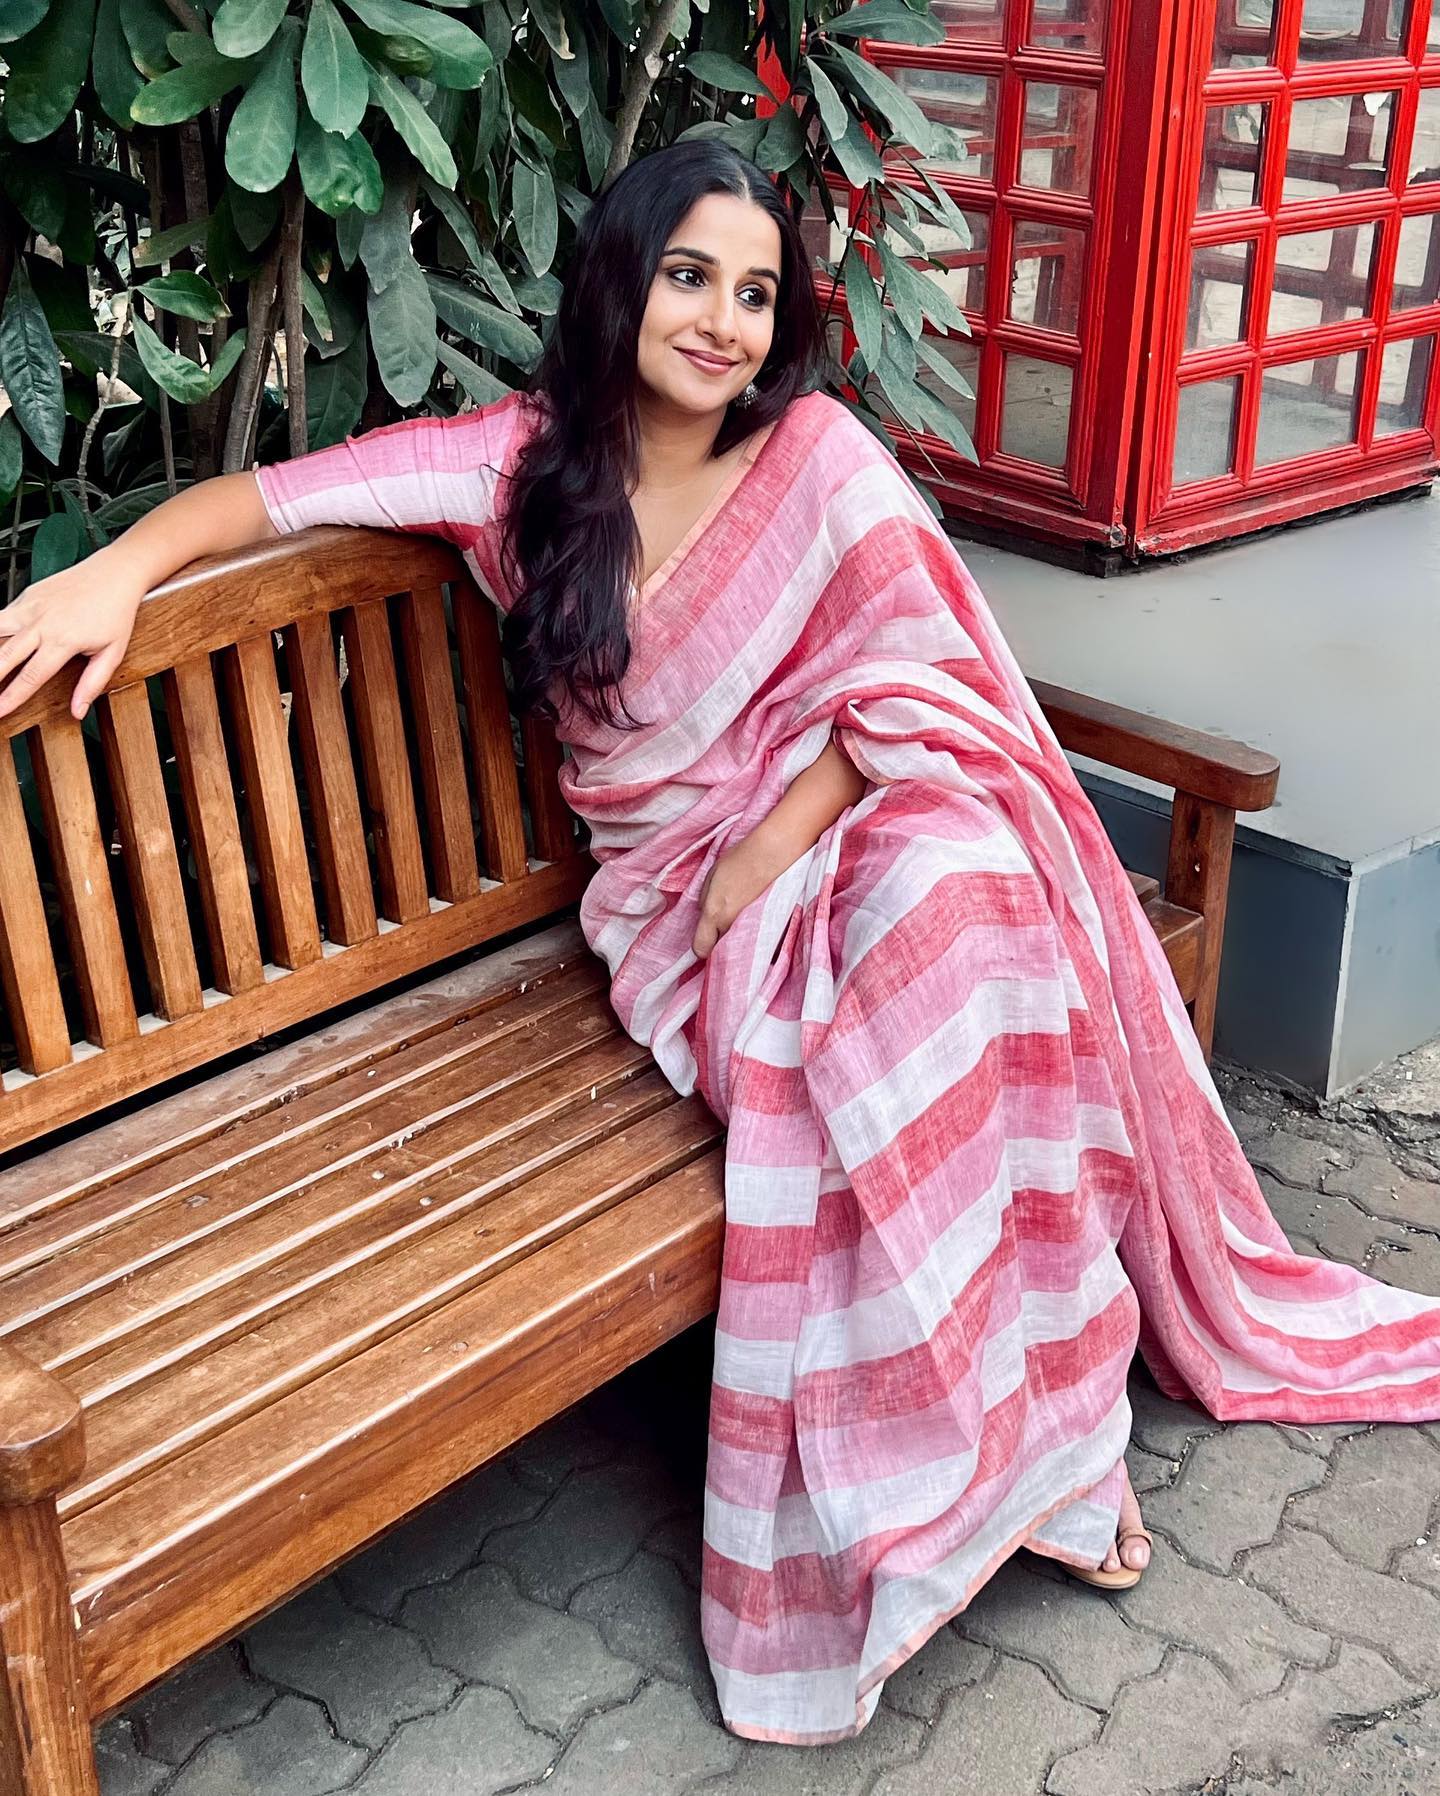 Exclusive! Vidya Balan: 'I Am Not Doing Anything To Make A Difference Really, But I Get Bored Very Easily'